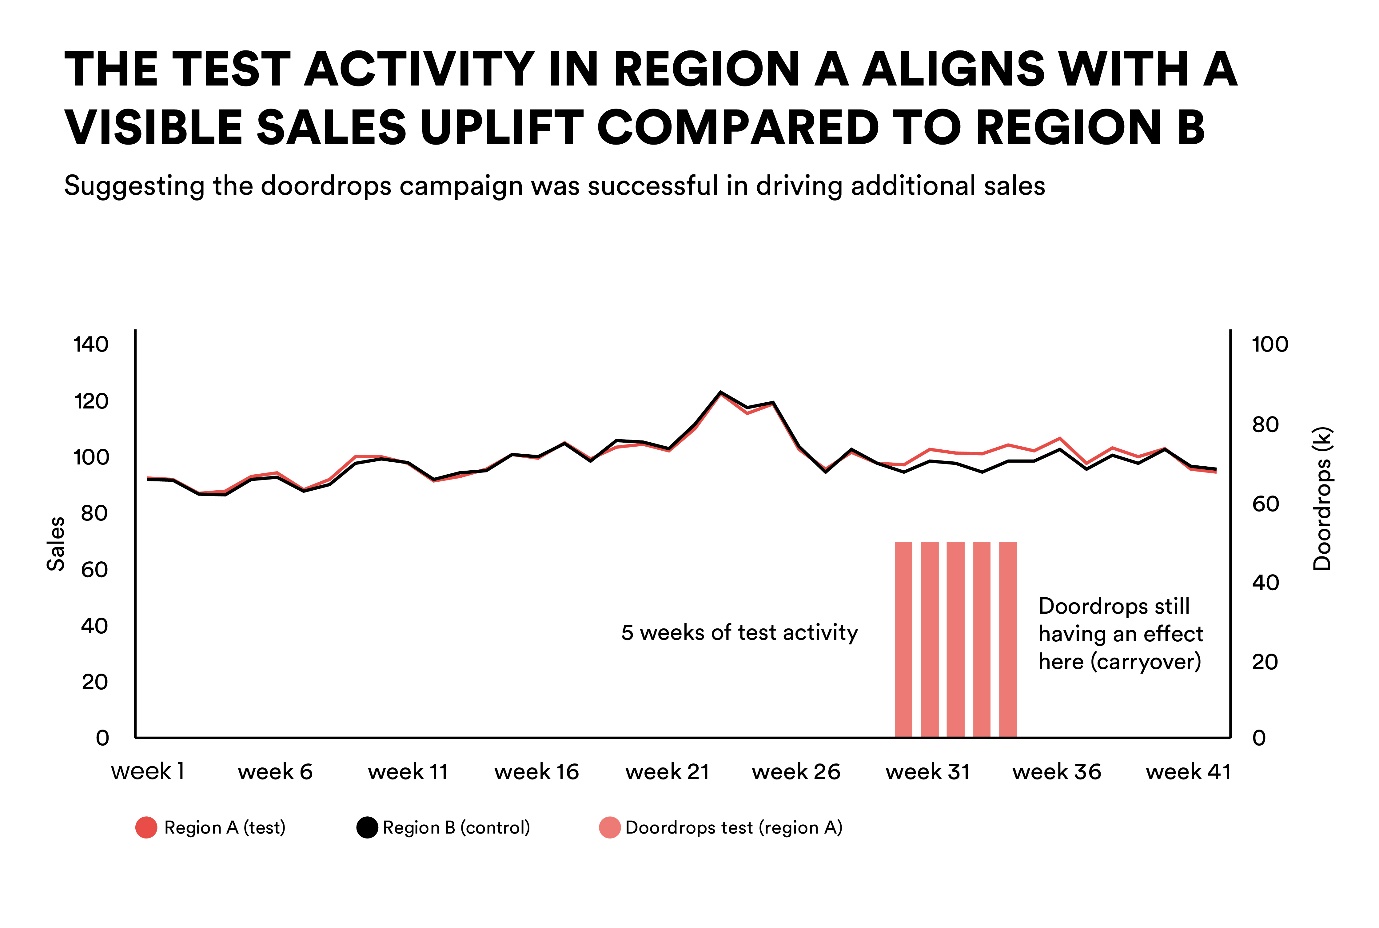 Table - The test activity in region A aligns with A visible sales uplift compared to region B